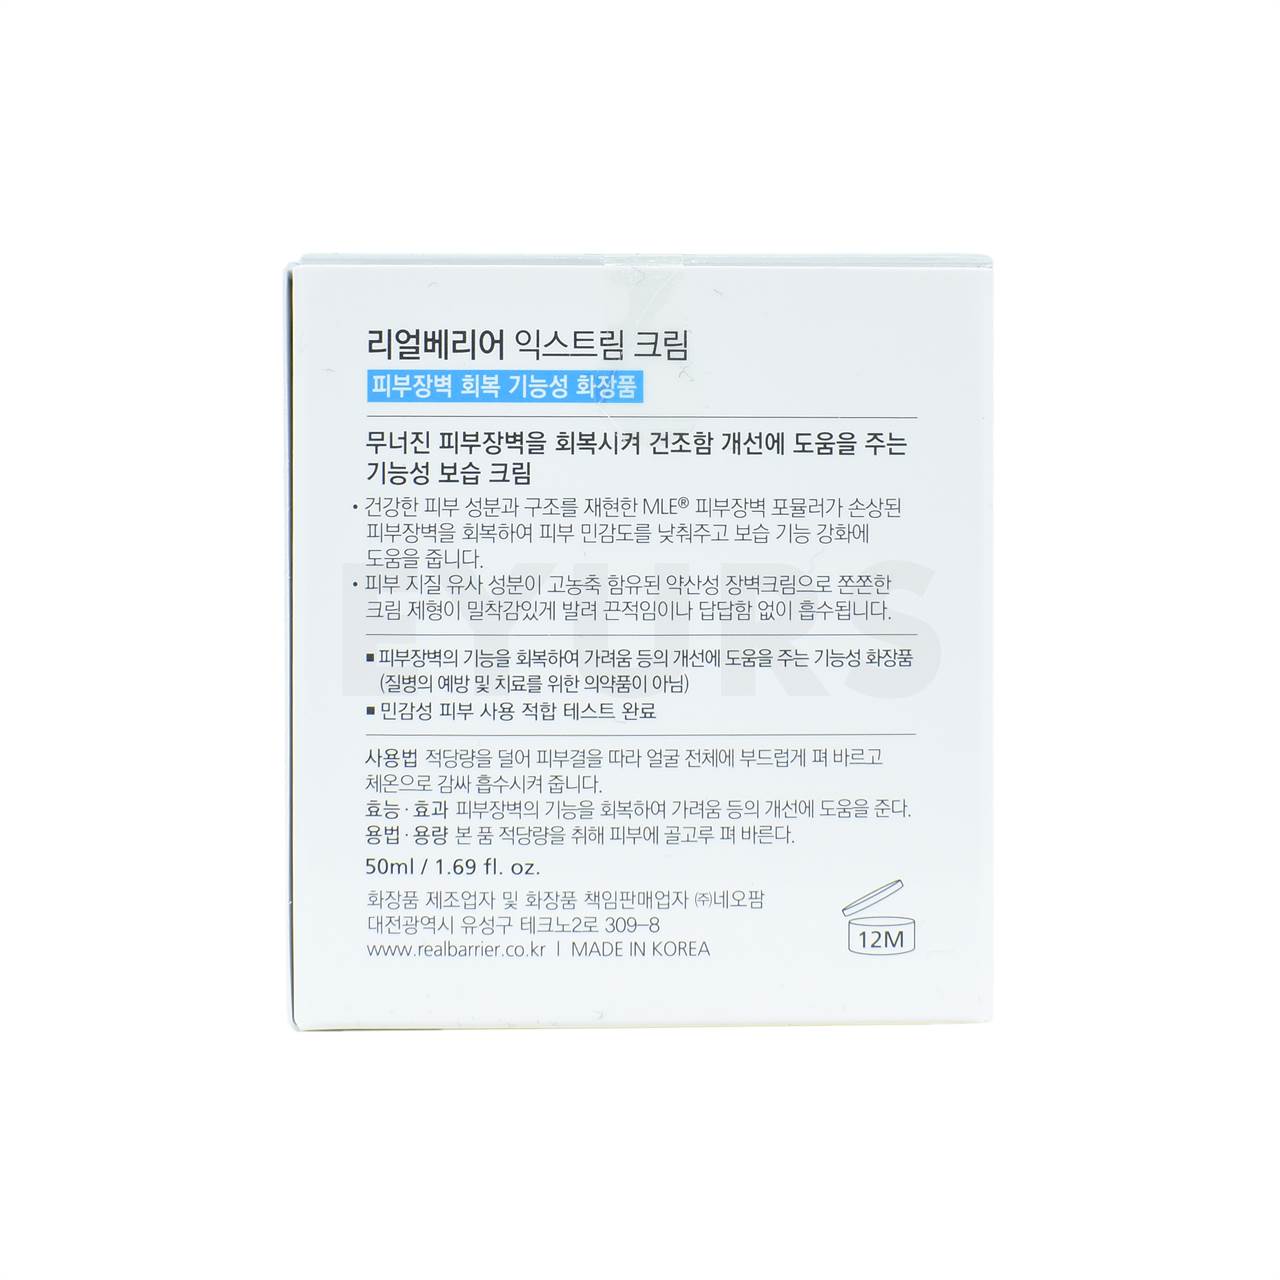 real barrier extreme cream 50ml back side packaging